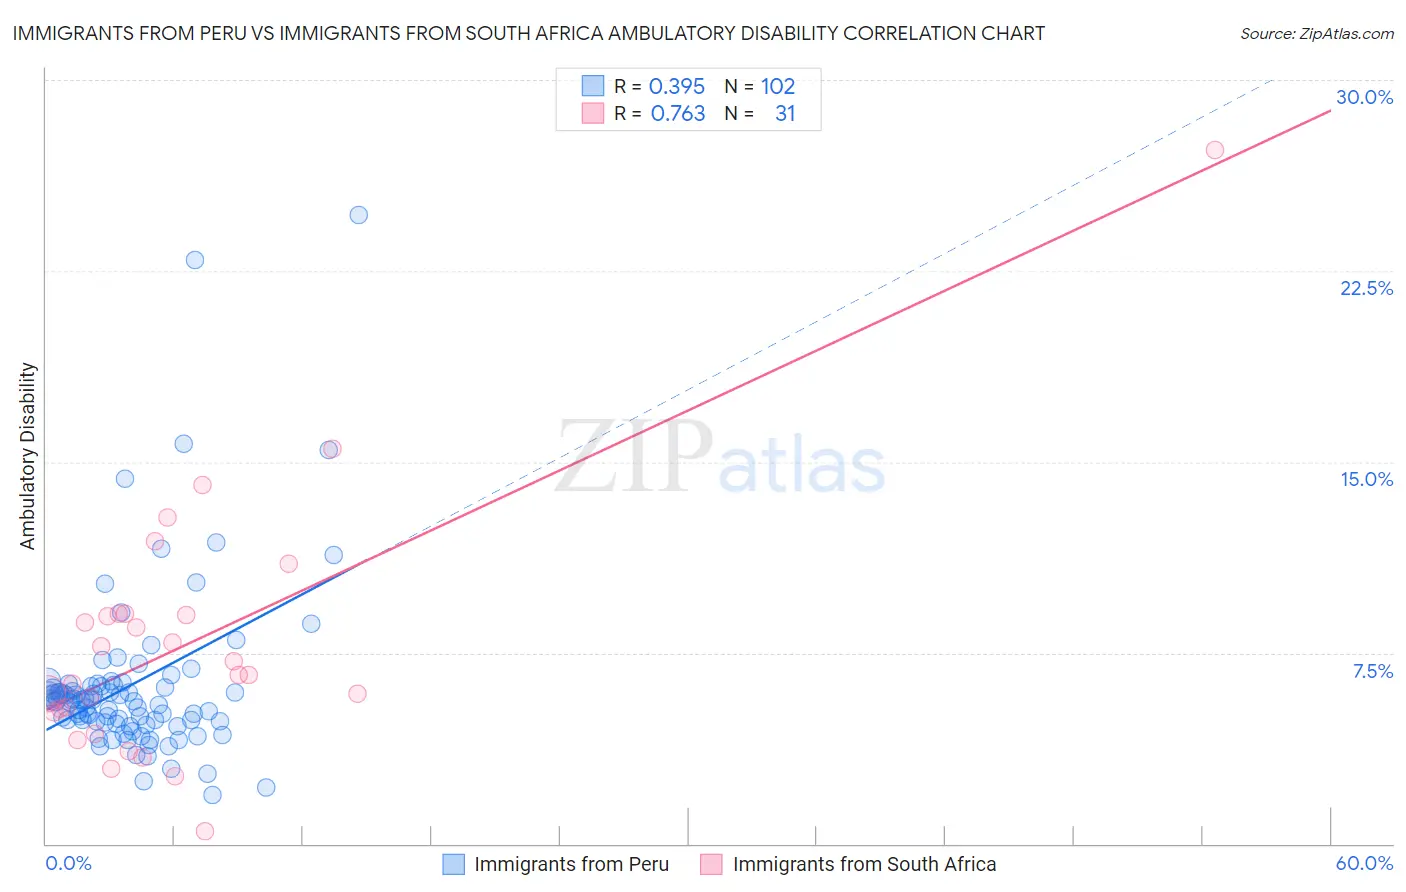 Immigrants from Peru vs Immigrants from South Africa Ambulatory Disability